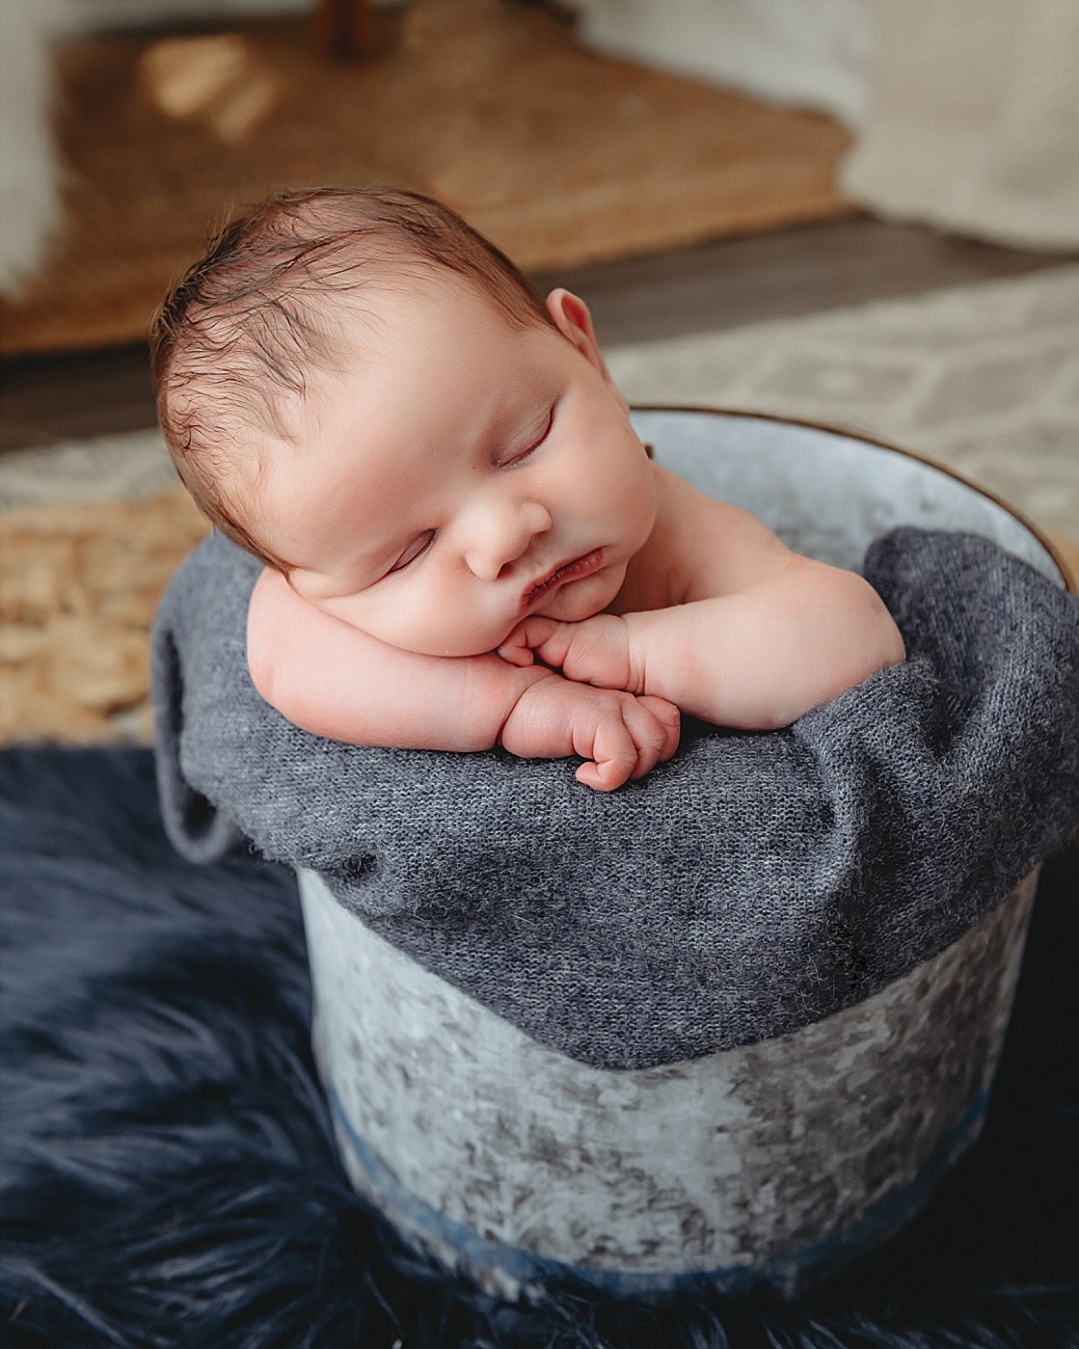 newborn baby in photography prop bucket for newborn photography session in Maryland